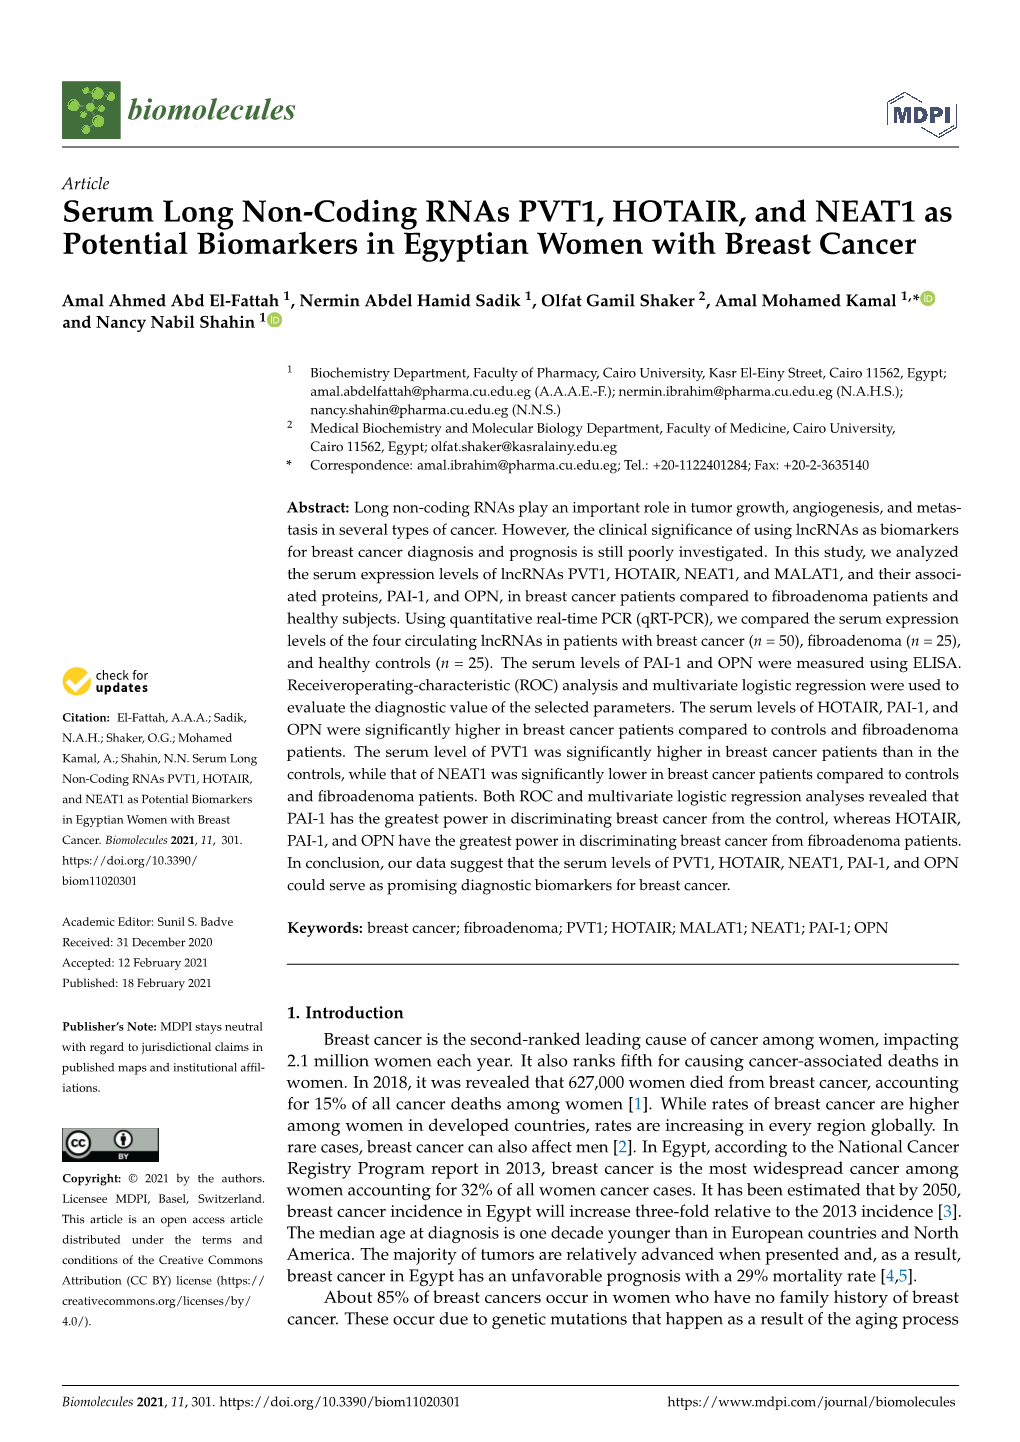 Serum Long Non-Coding Rnas PVT1, HOTAIR, and NEAT1 As Potential Biomarkers in Egyptian Women with Breast Cancer